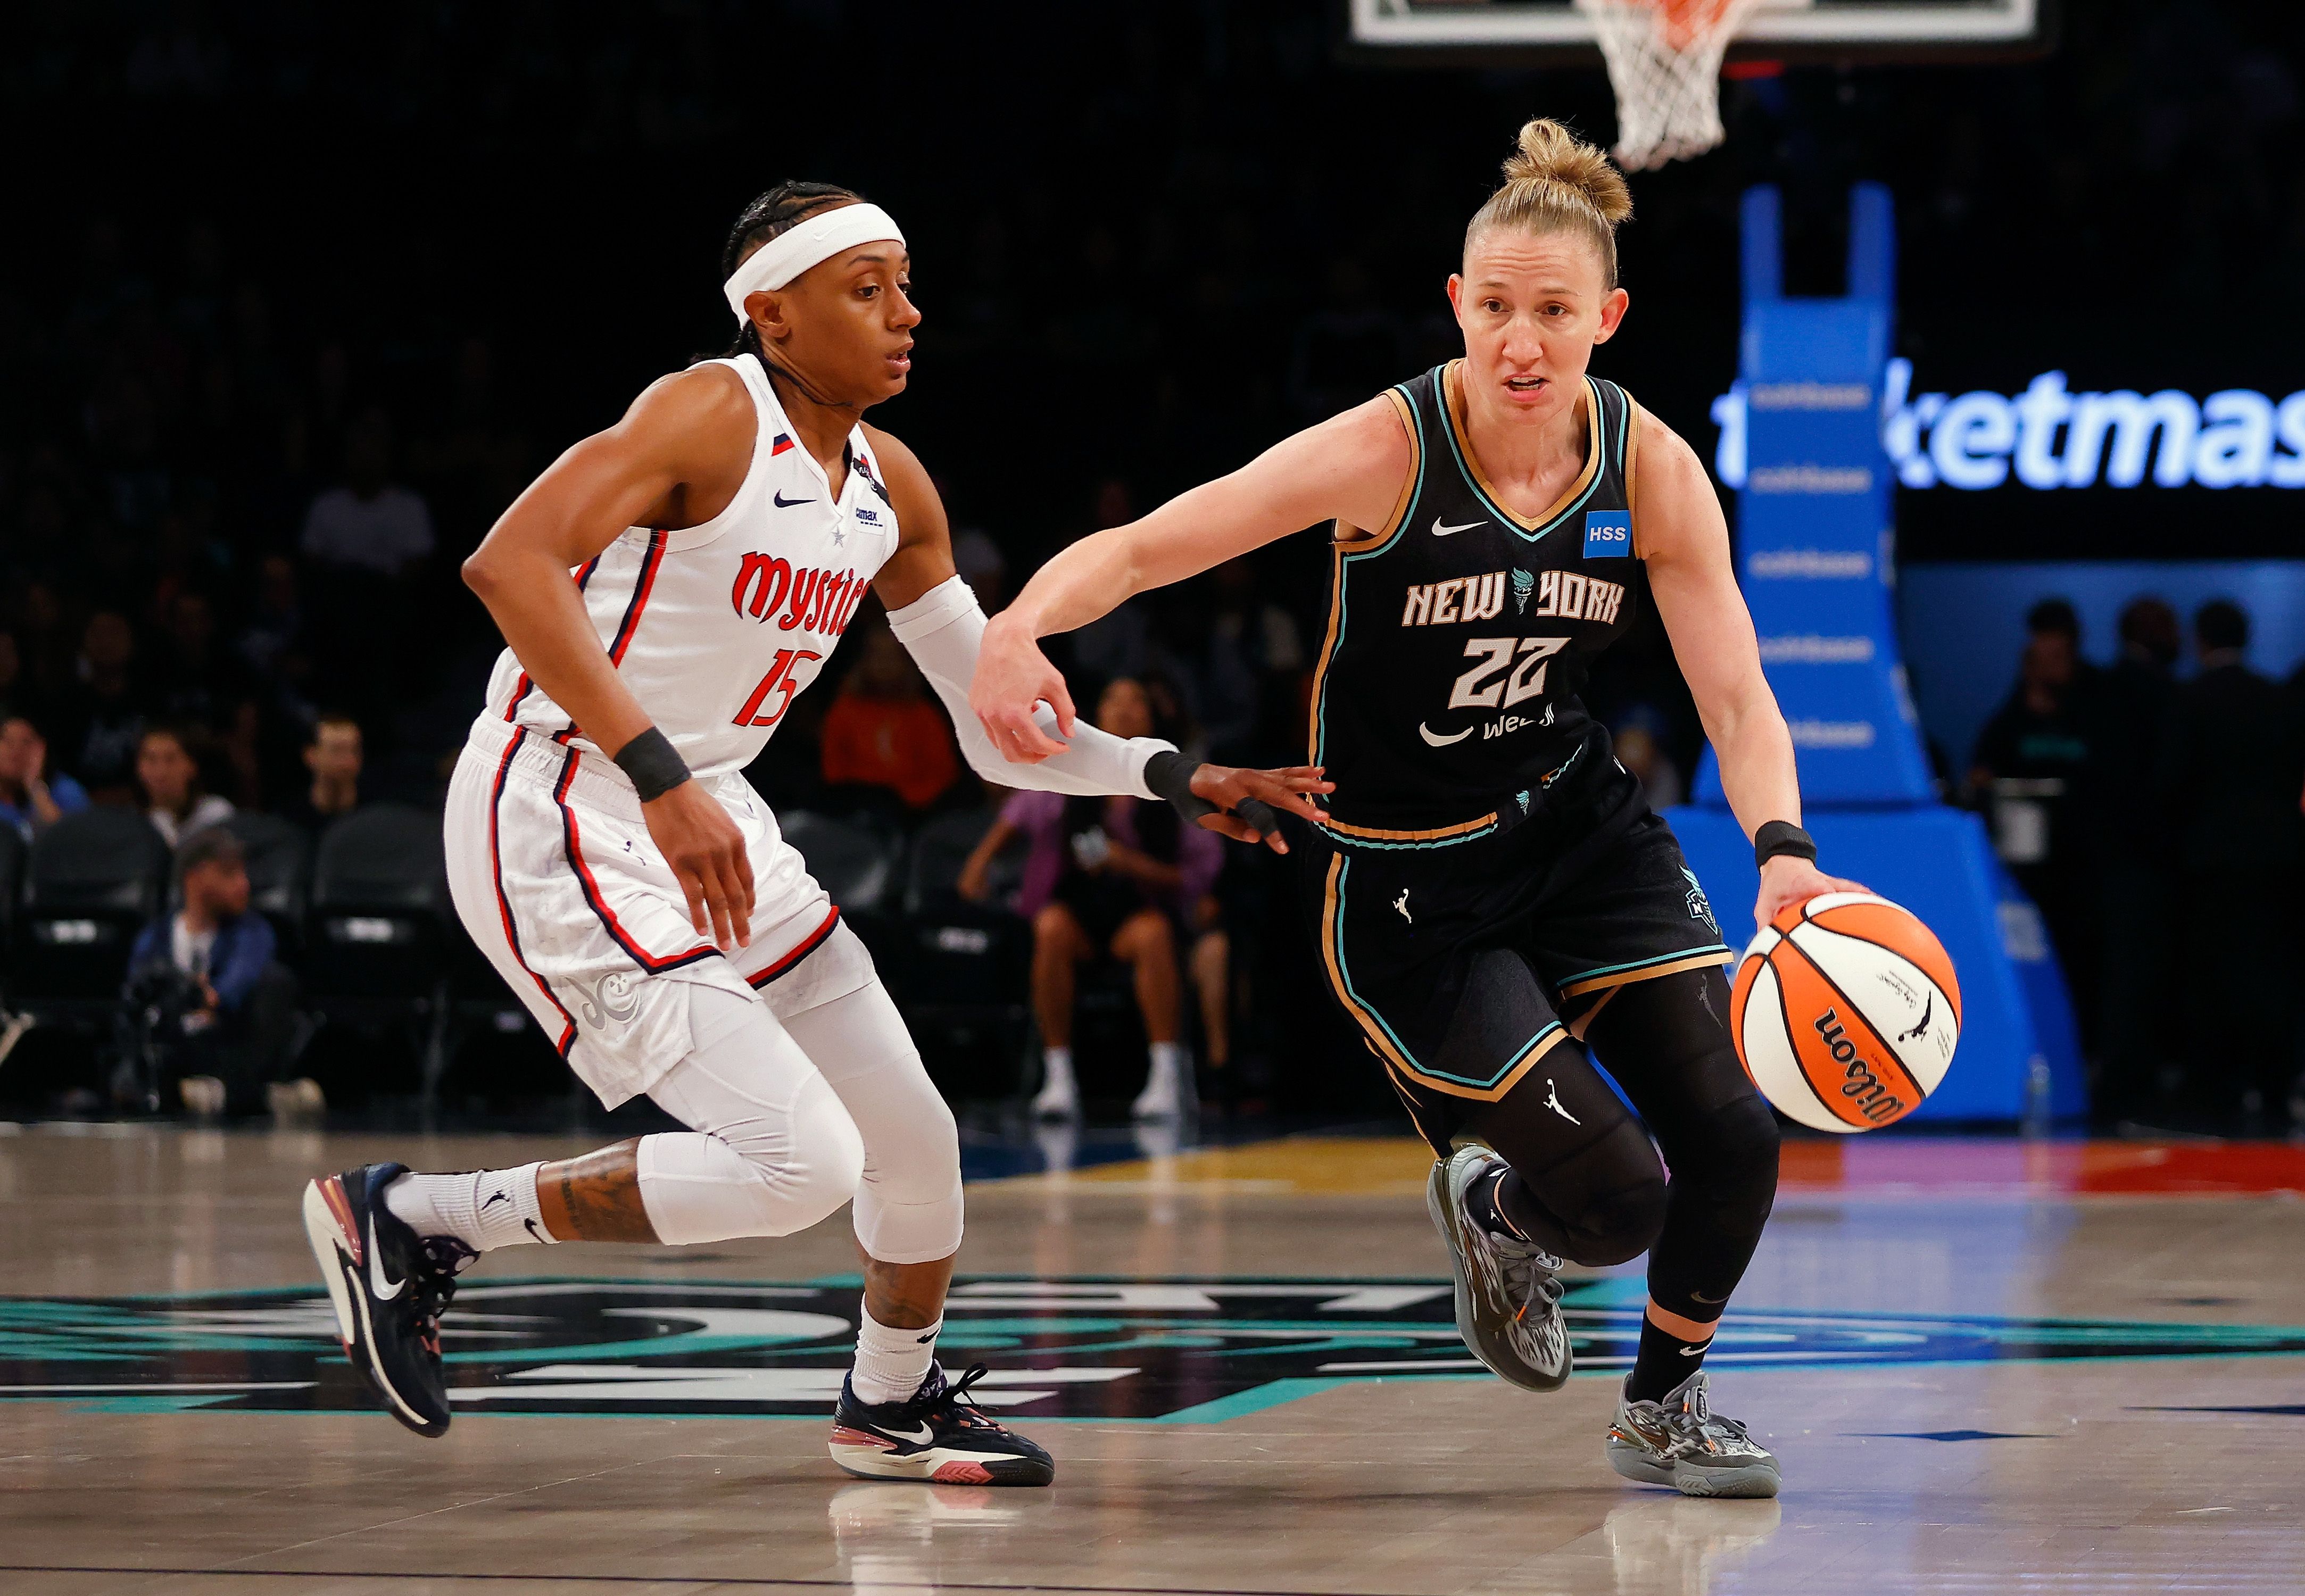 A woman in a black jersey dribbles a basketball past the defense